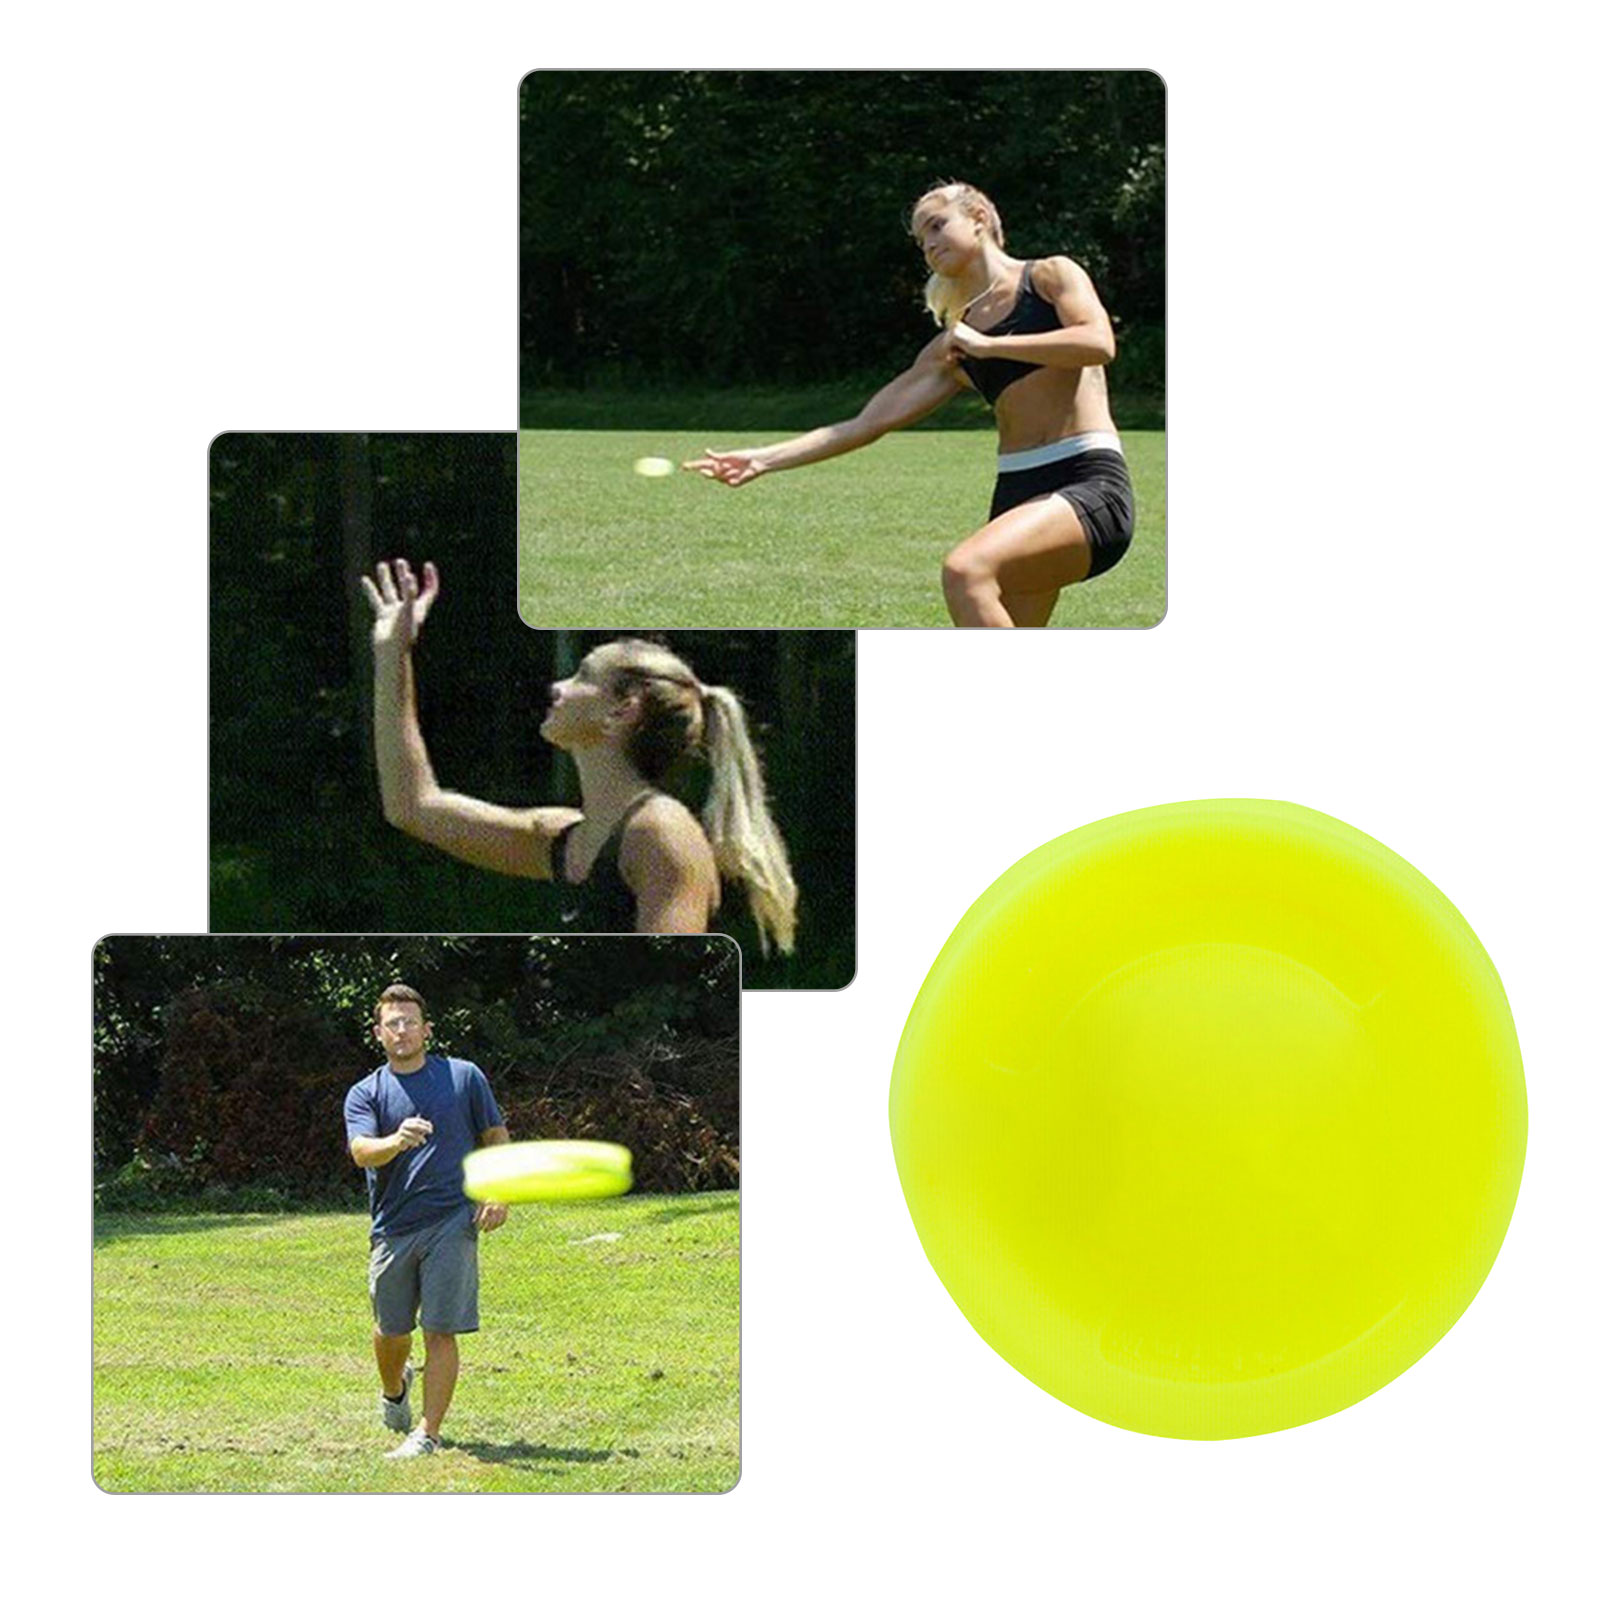 Mini Pocket Flexible Flying Disc Soft Silicone Gel Throwing and Catching Game OE 